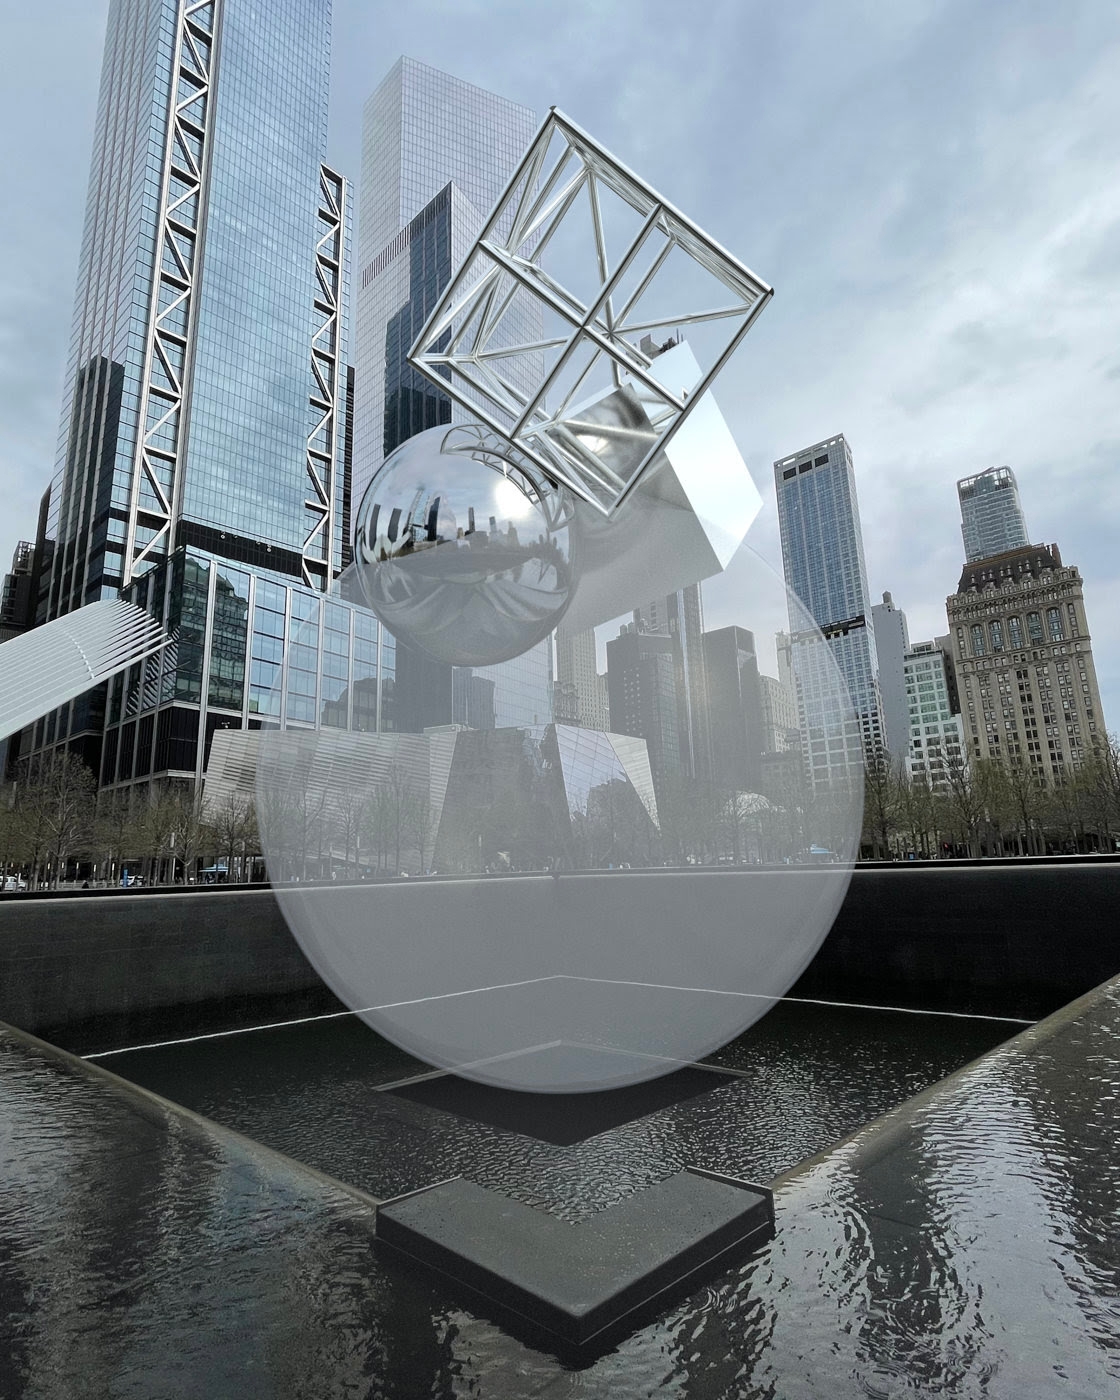 virtual sculpture hovering over 911 water pool